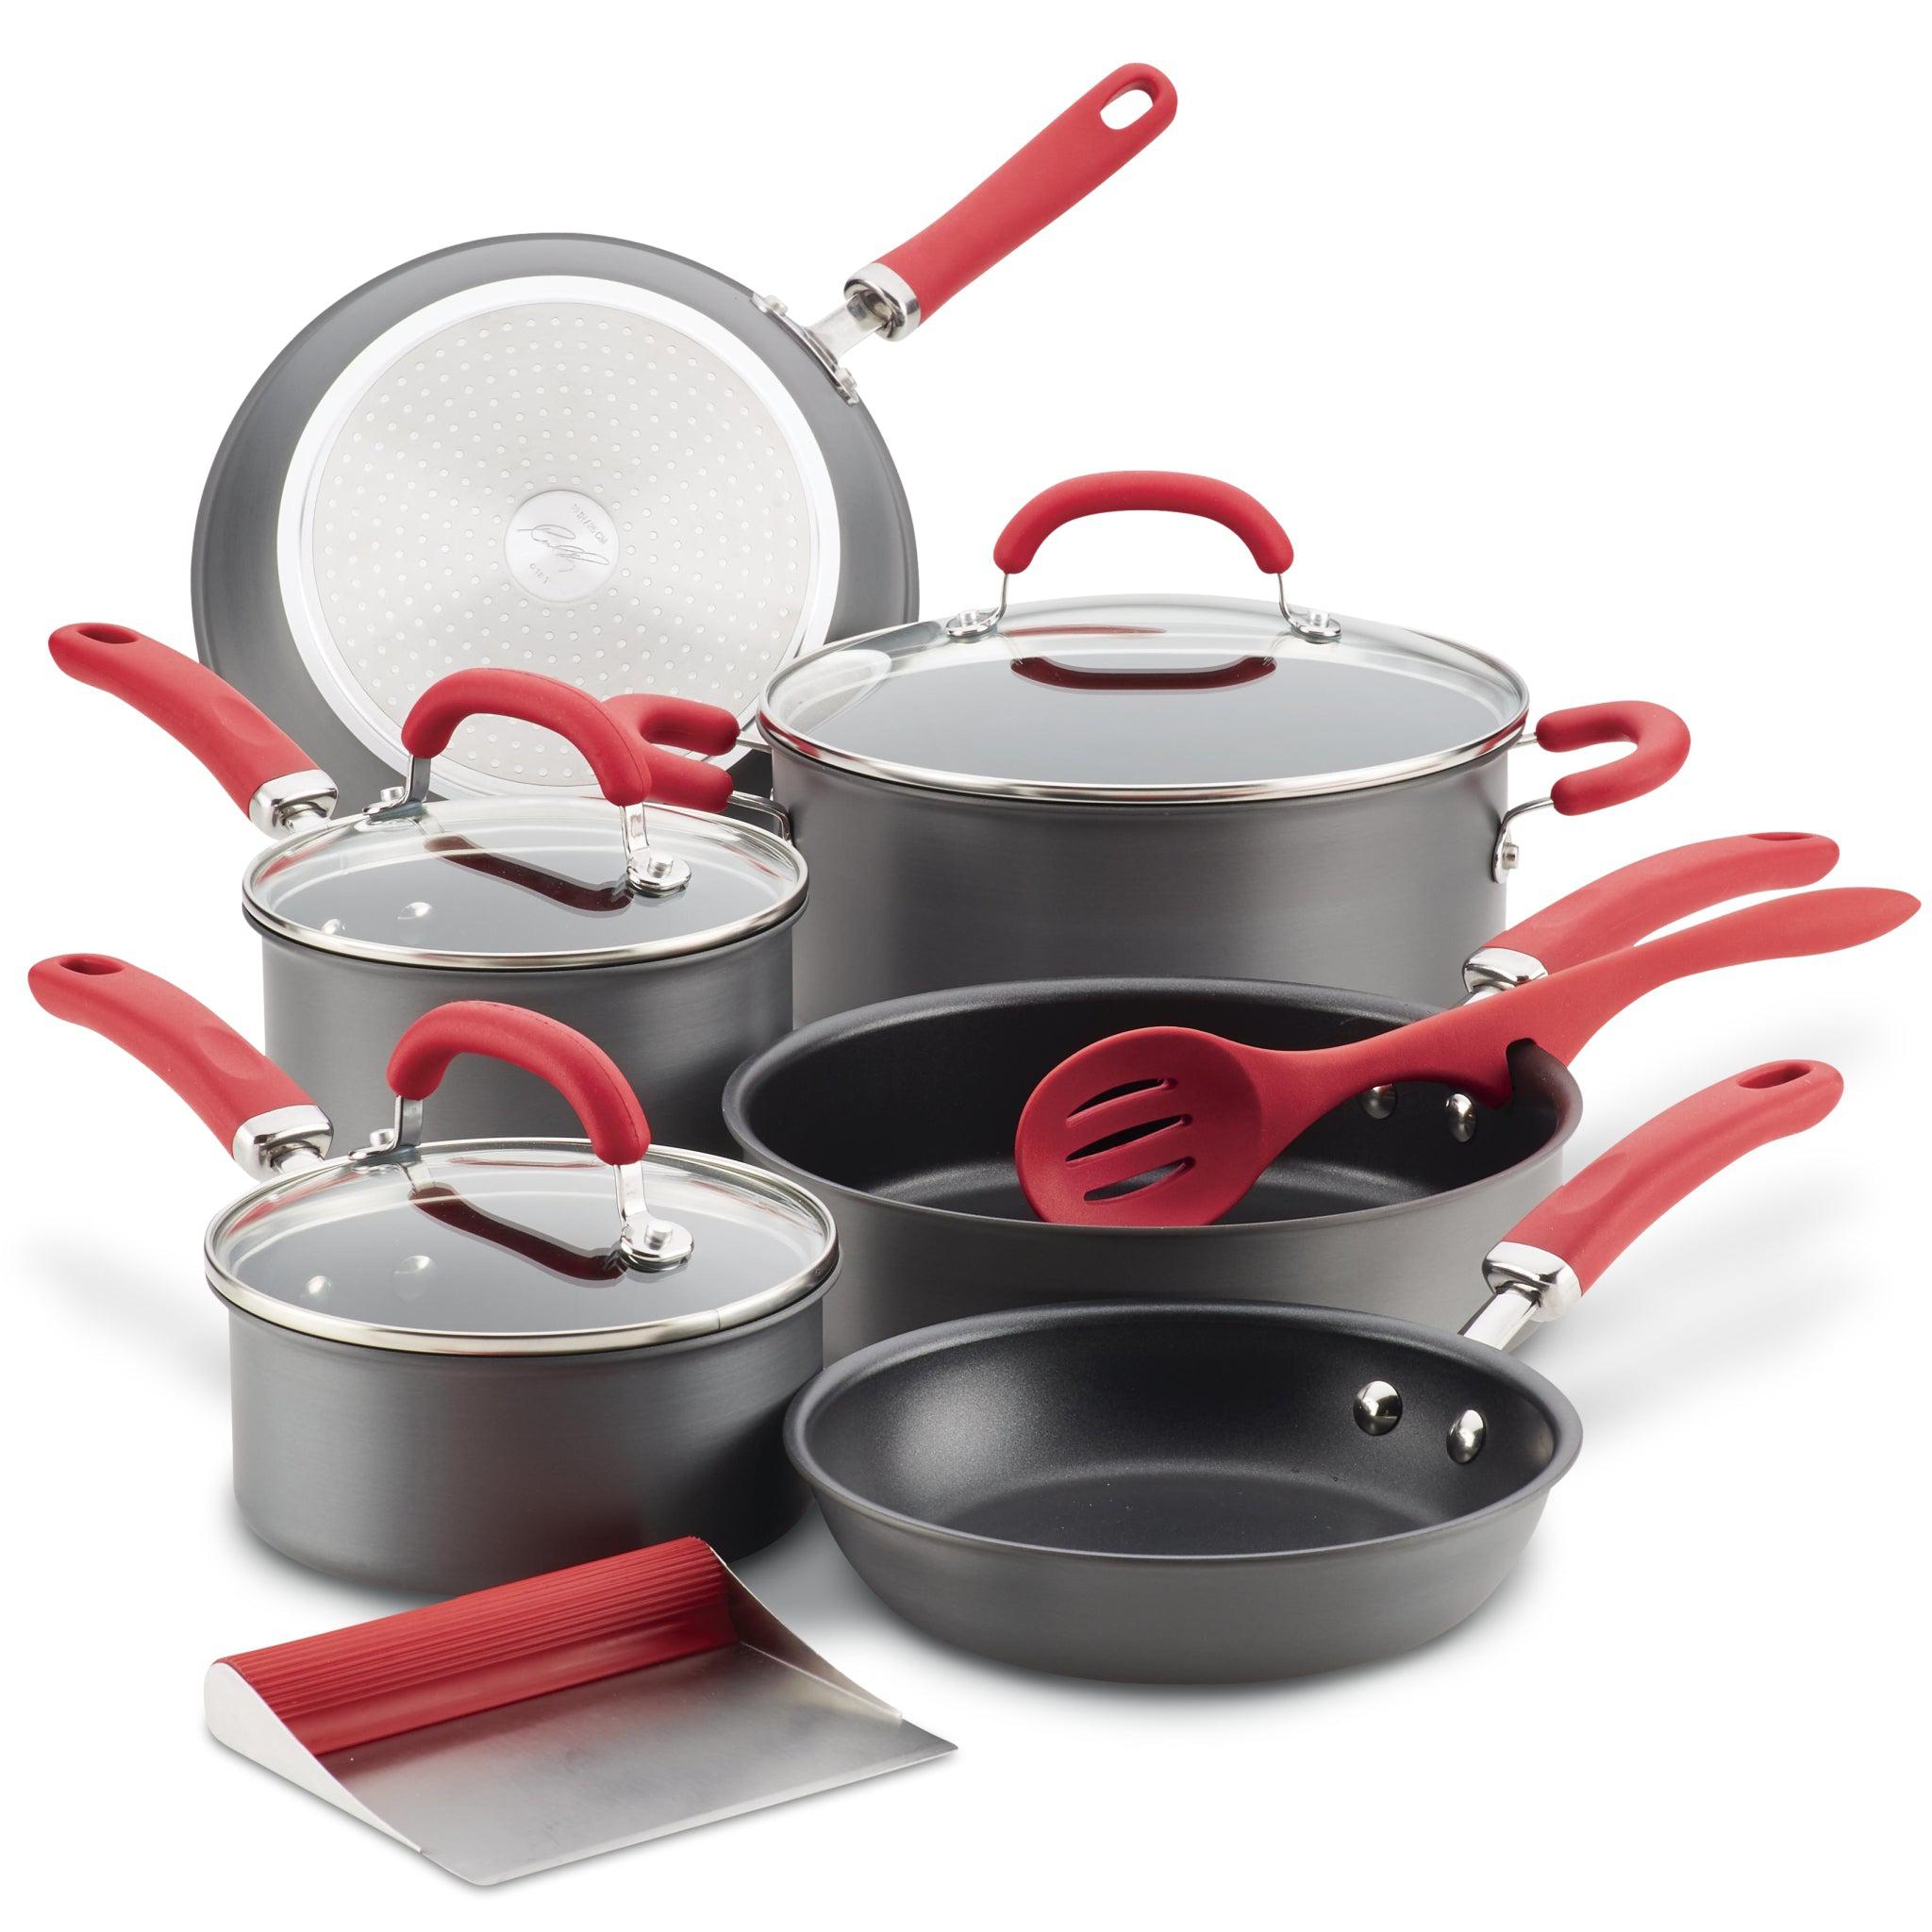 11-Piece Hard Anodized Nonstick Induction Cookware Set